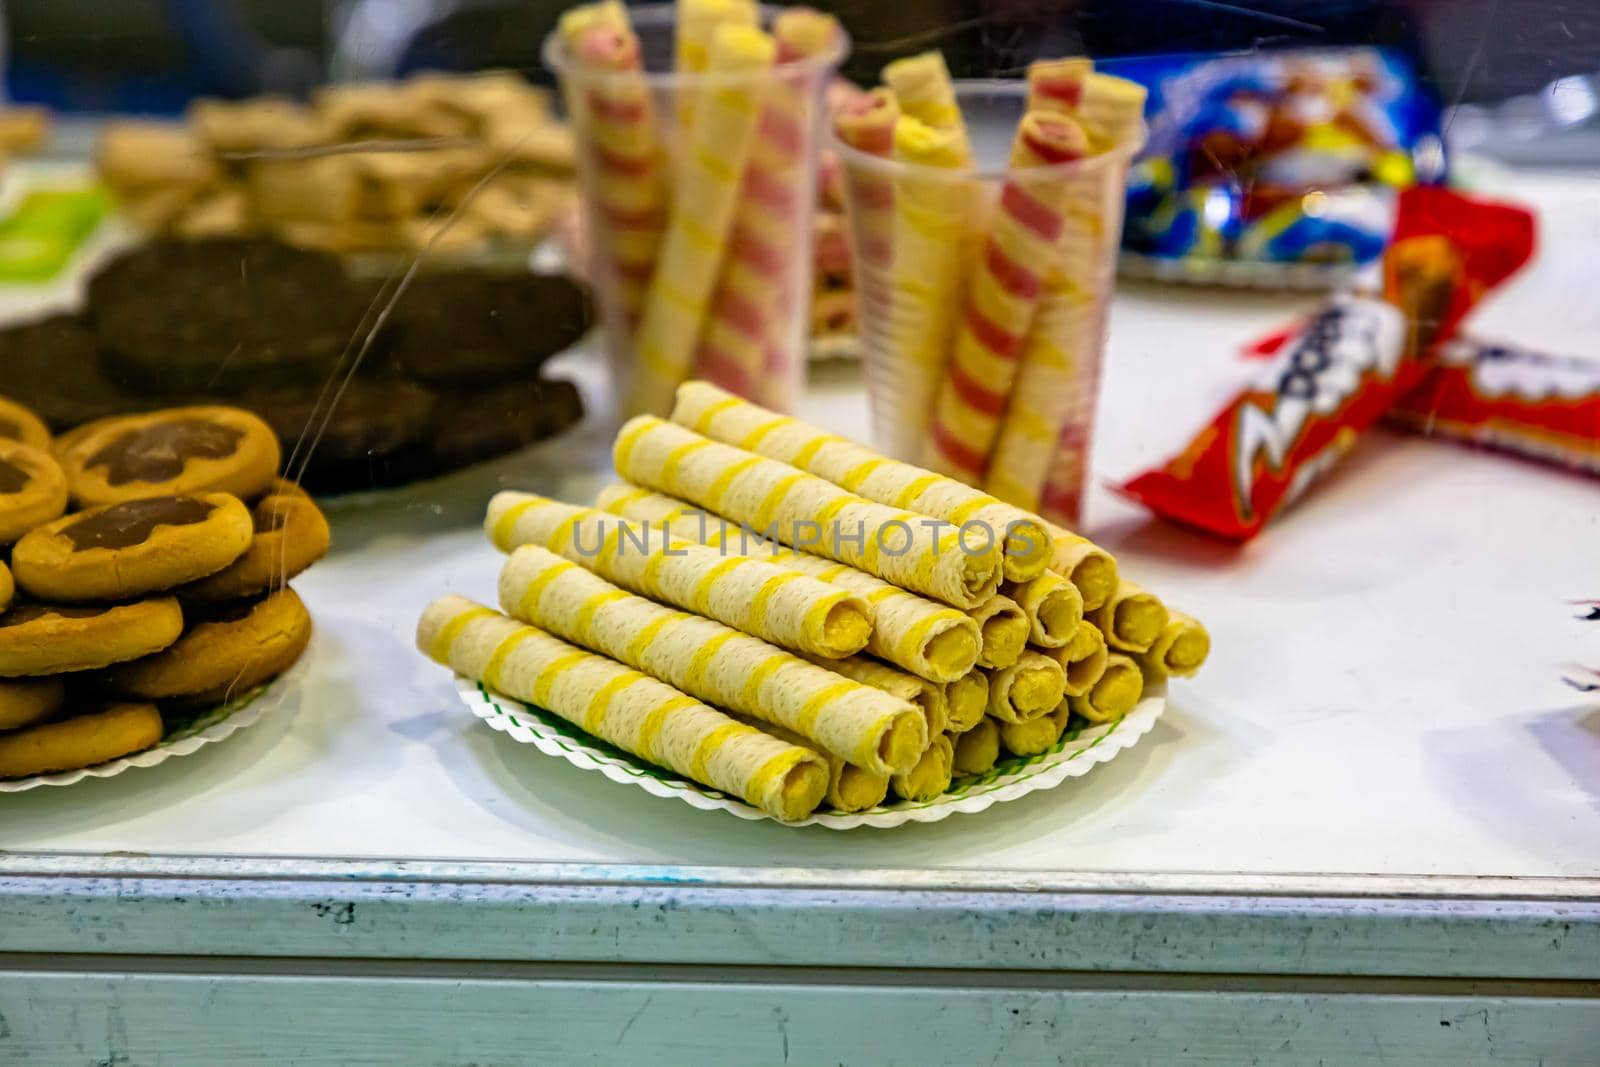 Waffle tubes are on display in a pastry shop